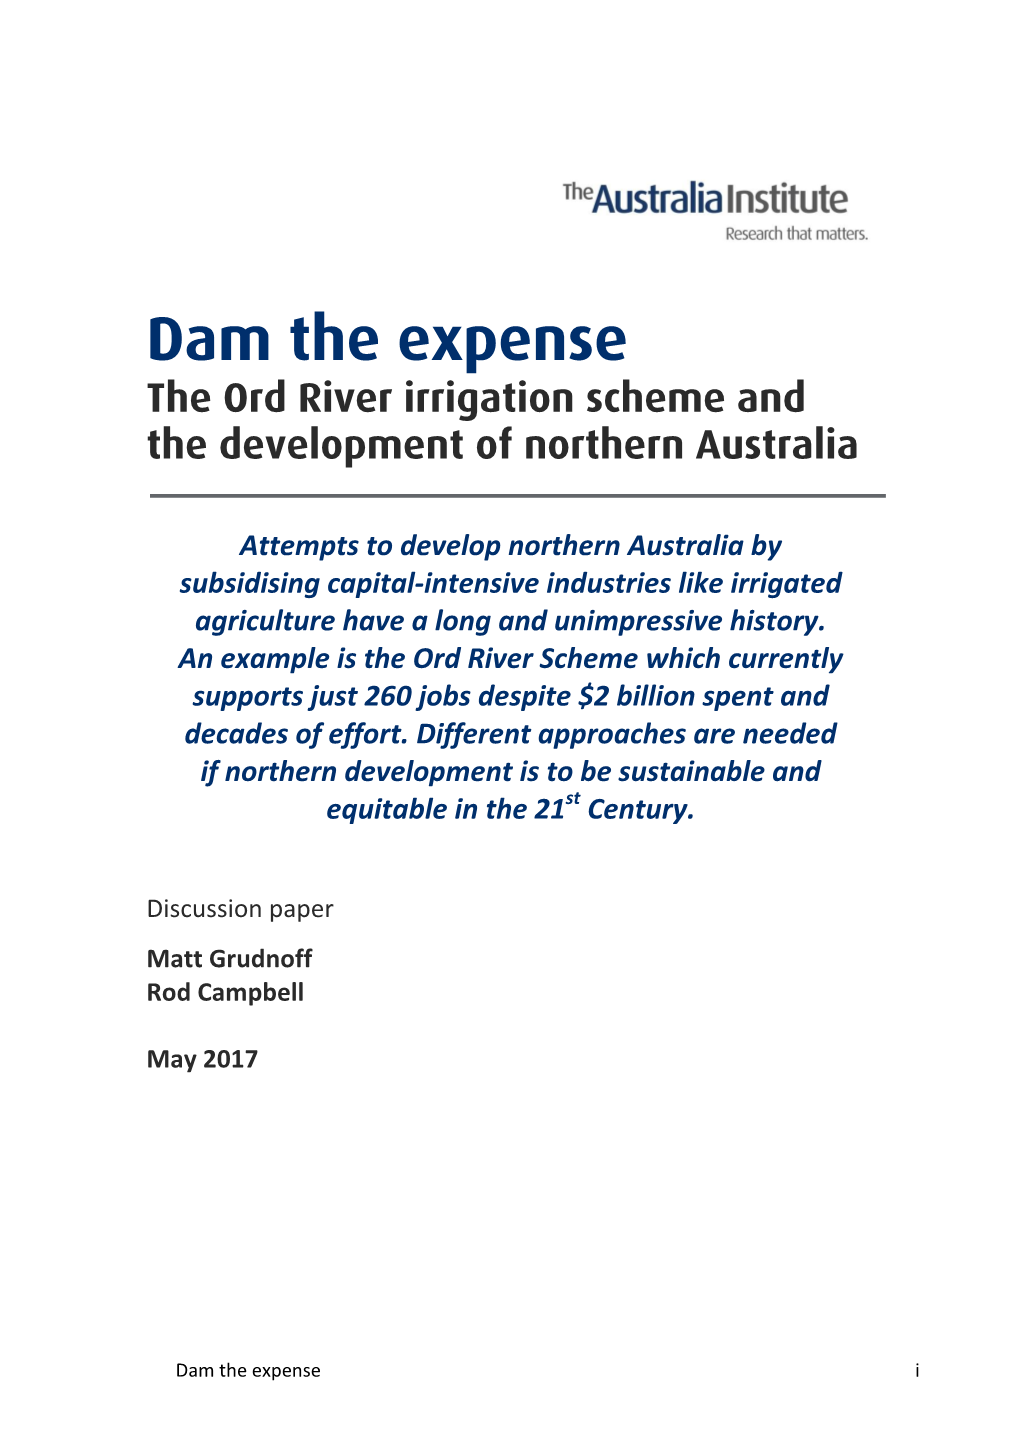 Dam the Expense the Ord River Irrigation Scheme and the Development of Northern Australia